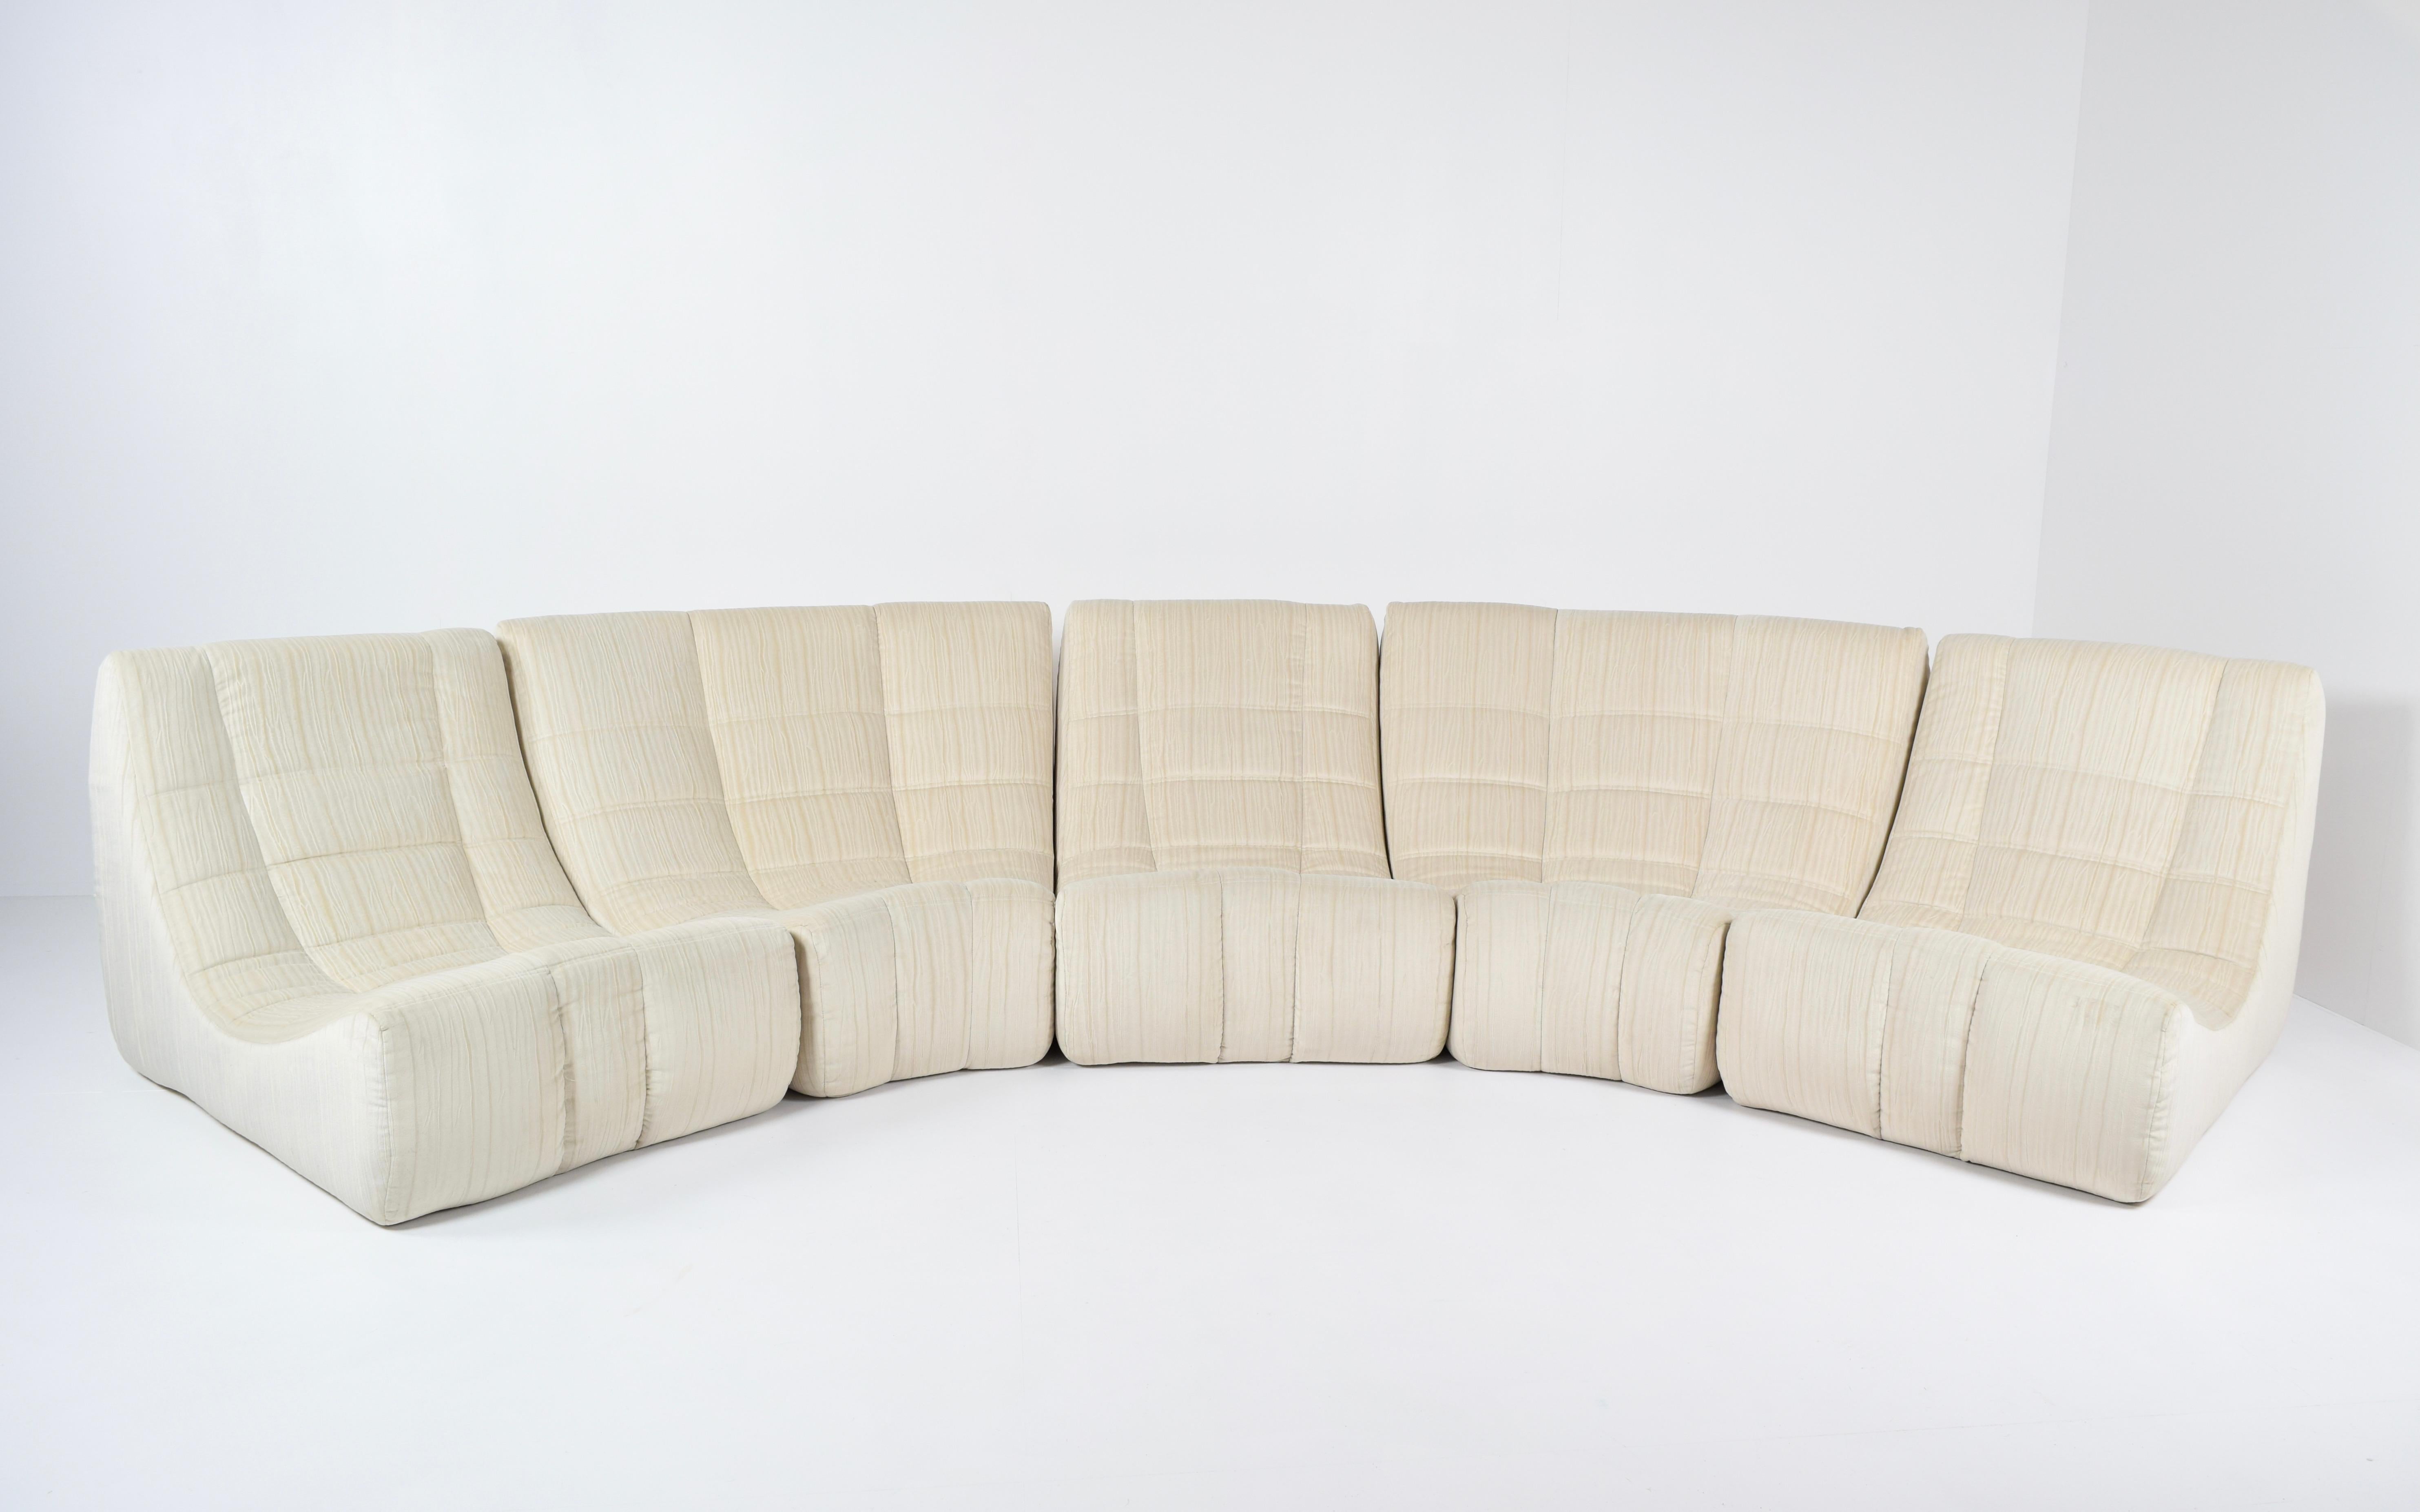 Impressive large modular sofa 'Gilda' by Michel Ducaroy. This sofa is very rare and produced by Ligne Roset in 1972. It consists of five pieces in two variations (two larger pieces and three smallers ones) connected by metal buckles, forming about a